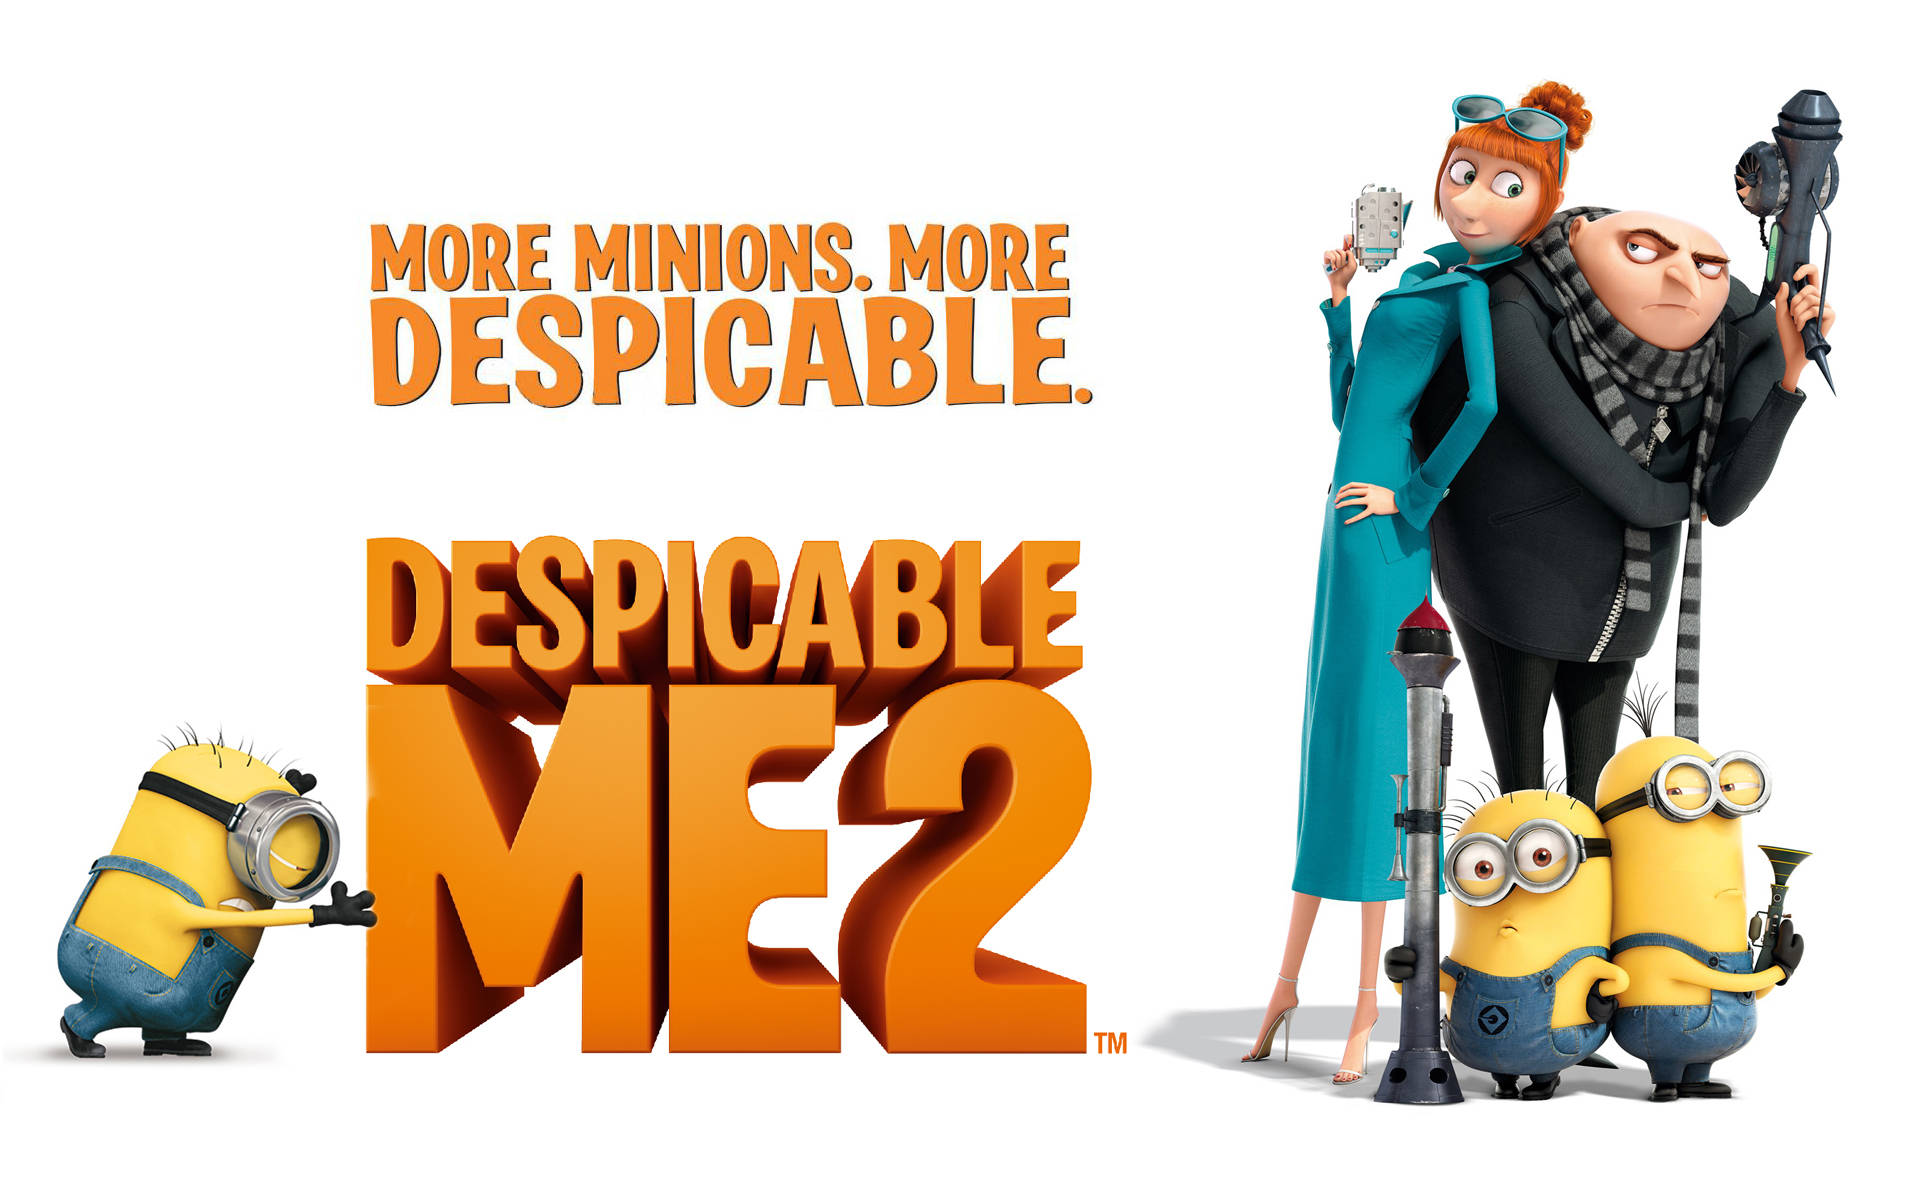 Despicable Me 2 Movie Poster Wallpaper